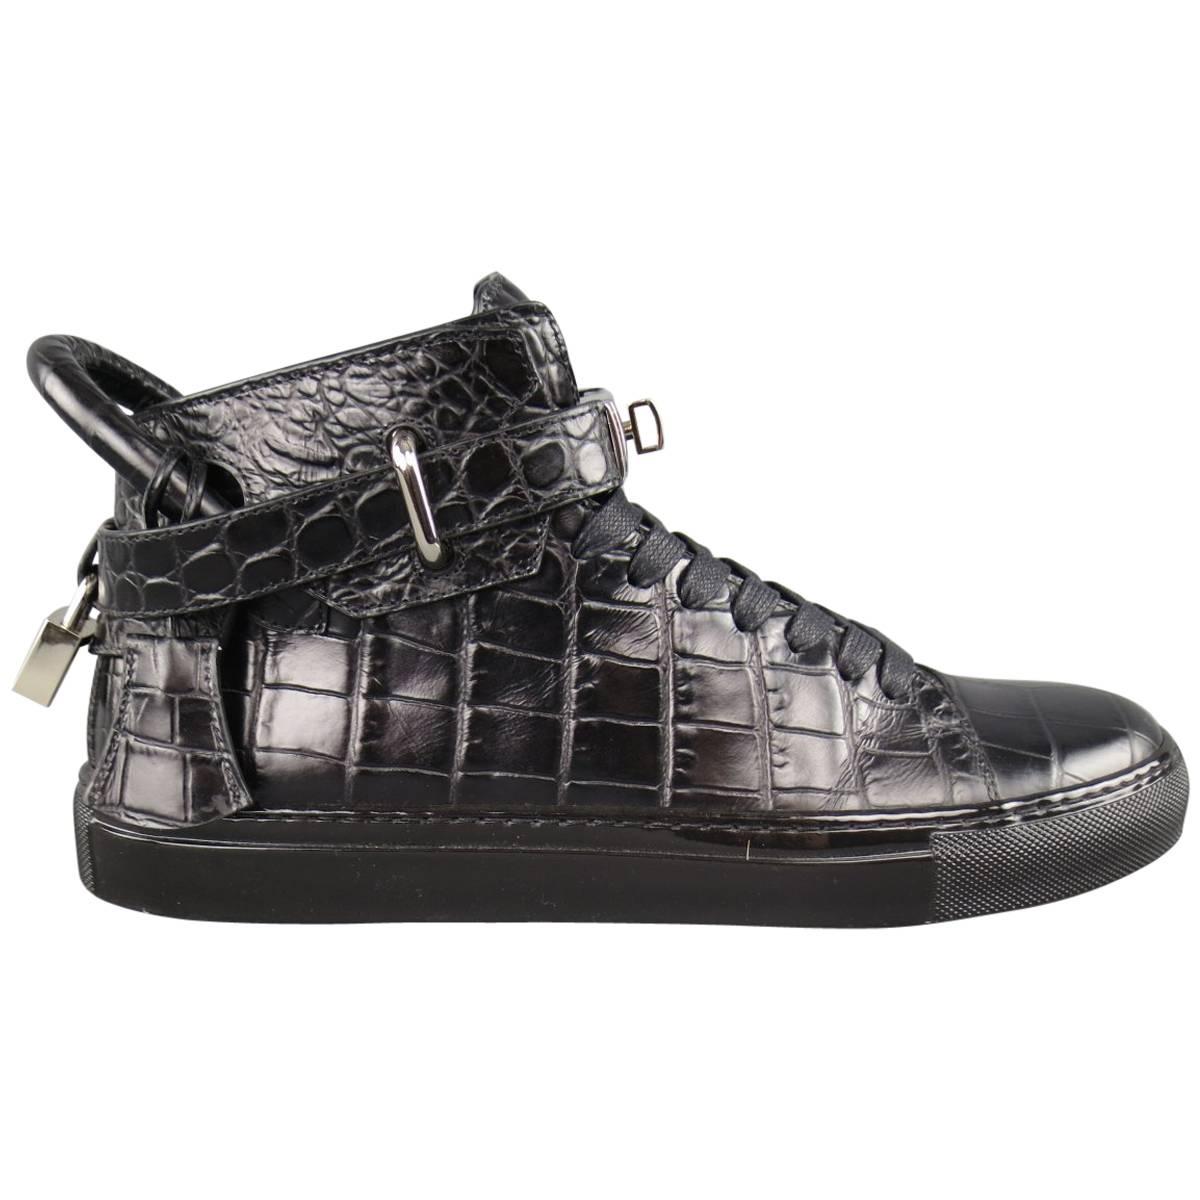 Men's BUSCEMI Size 8 Black Aligator Embossed Leather 100mm High Top Sneakers